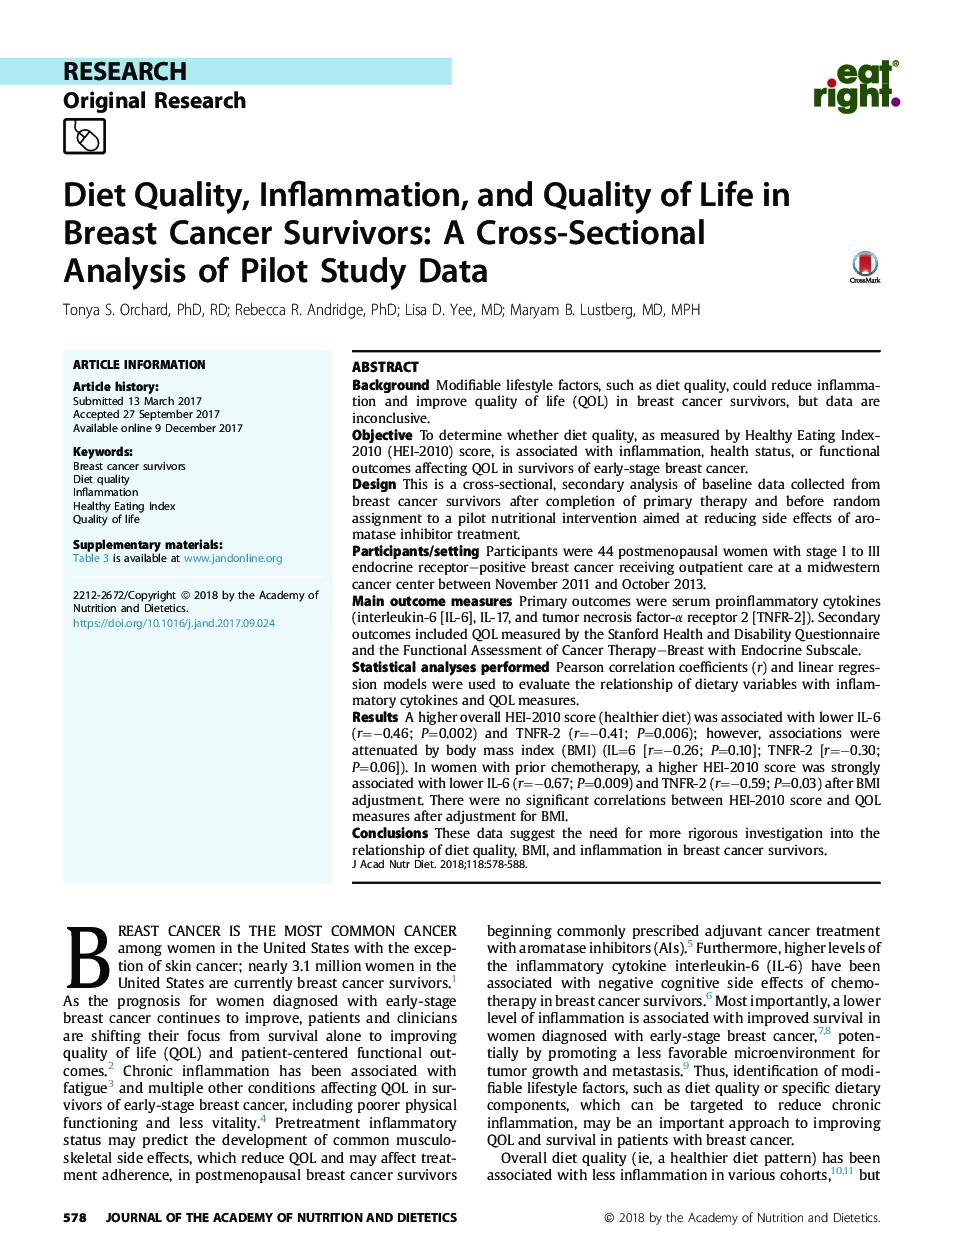 Diet Quality, Inflammation, and Quality of Life in Breast Cancer Survivors: A Cross-Sectional Analysis of Pilot Study Data